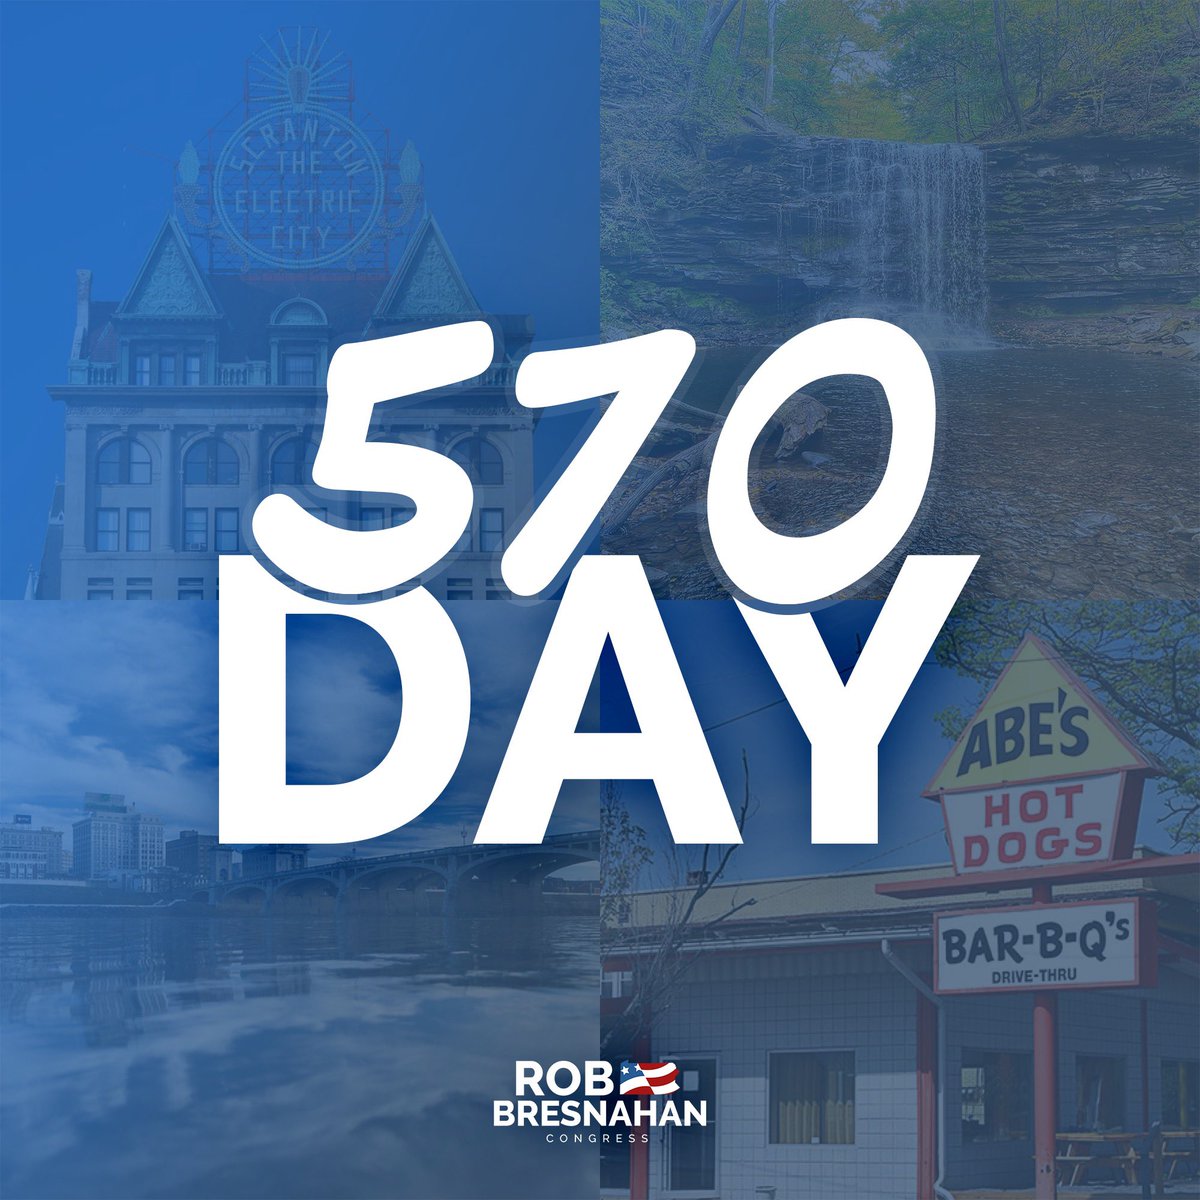 Today, we celebrate all things NEPA! We have the best people, businesses, and beauty! I was born, raised, and will die in the #570, and there’s no place I’d rather be! #570Day